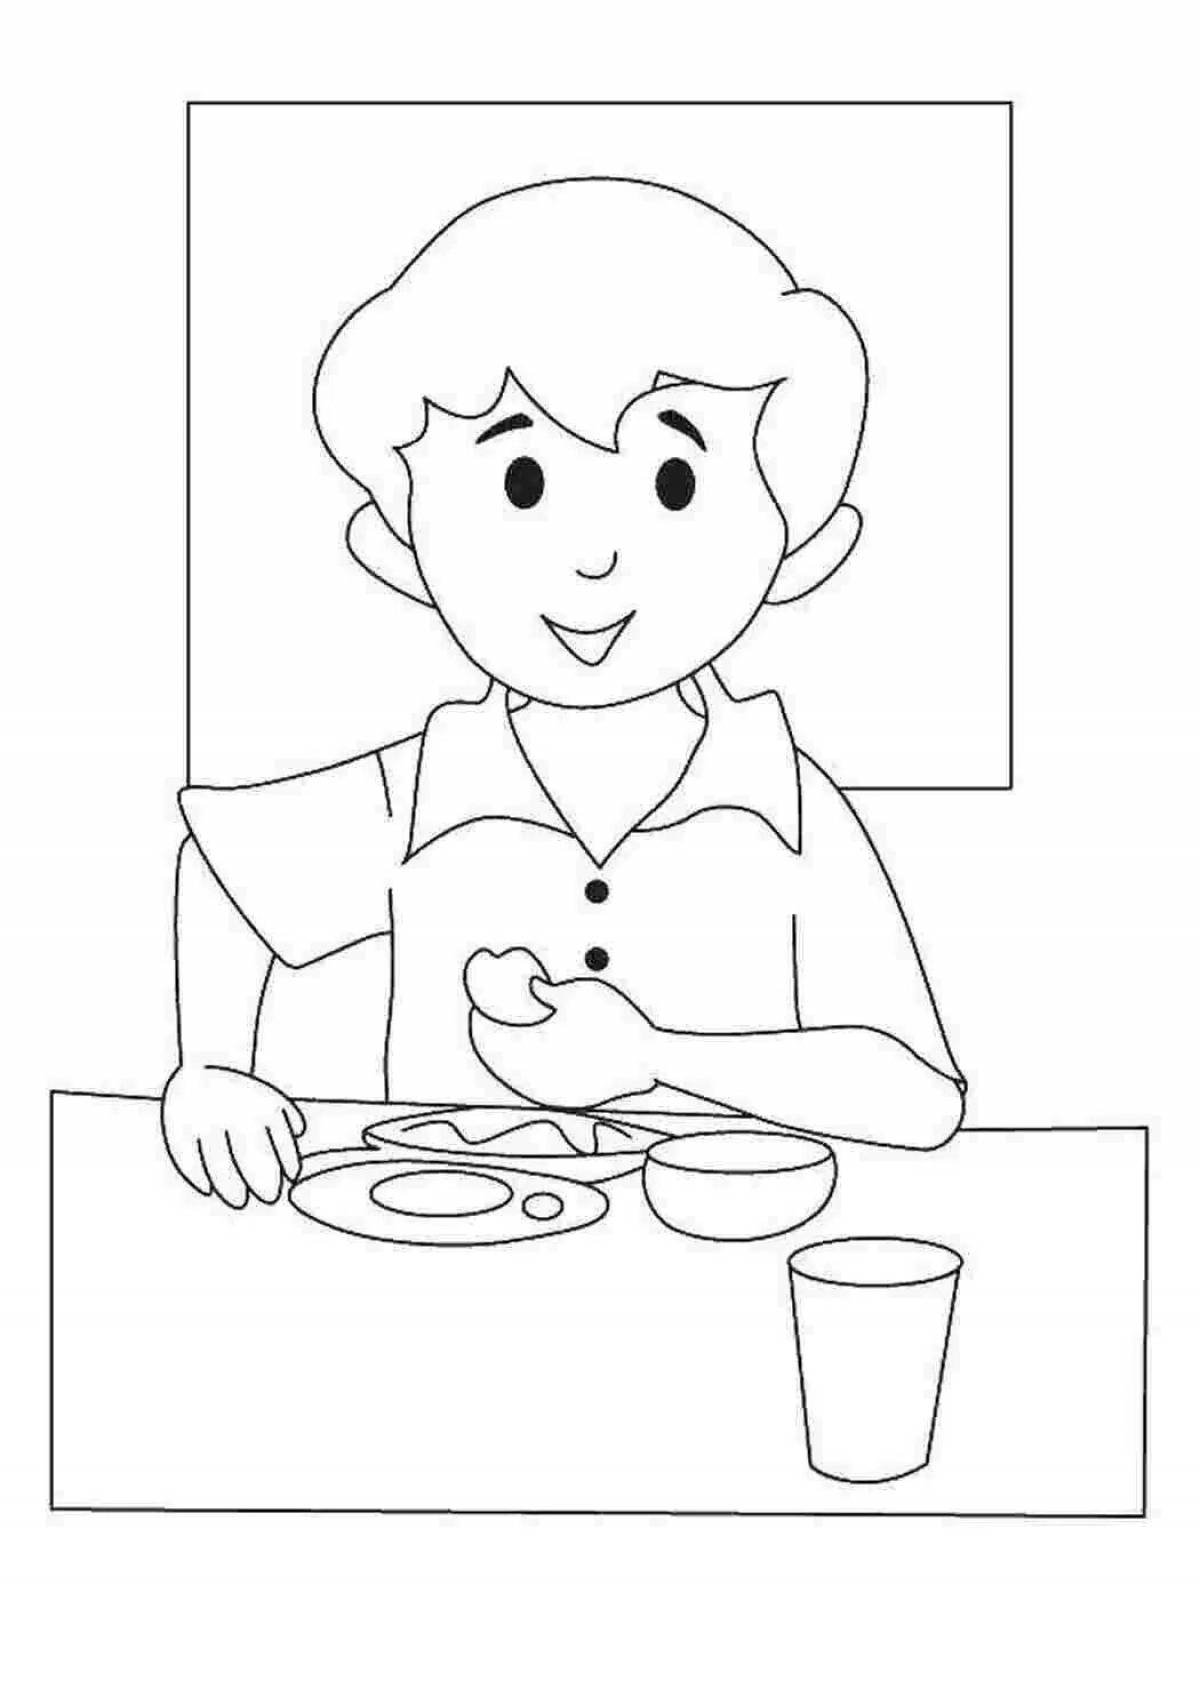 Bright table manners coloring book